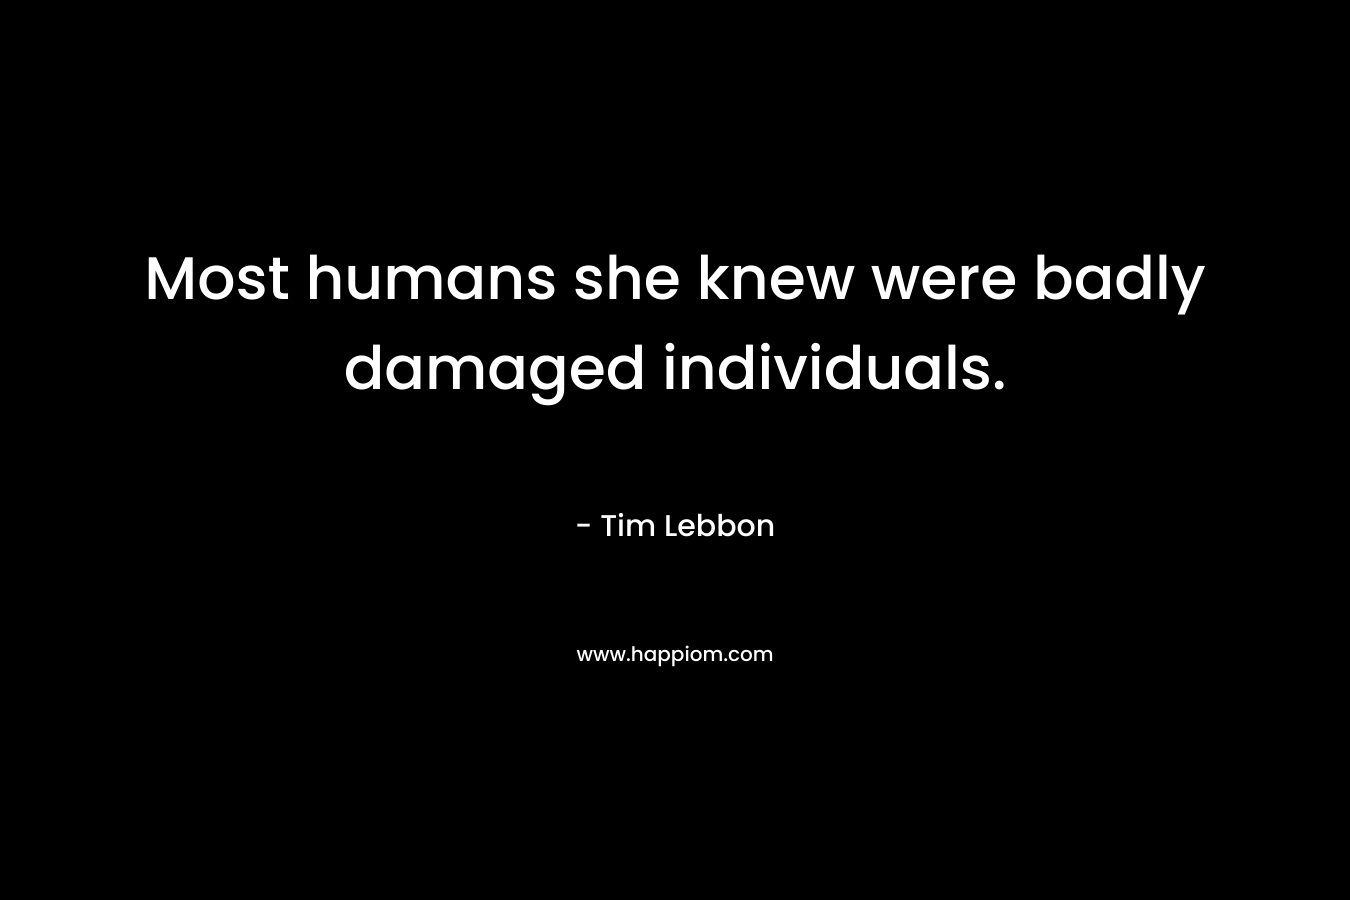 Most humans she knew were badly damaged individuals. – Tim Lebbon